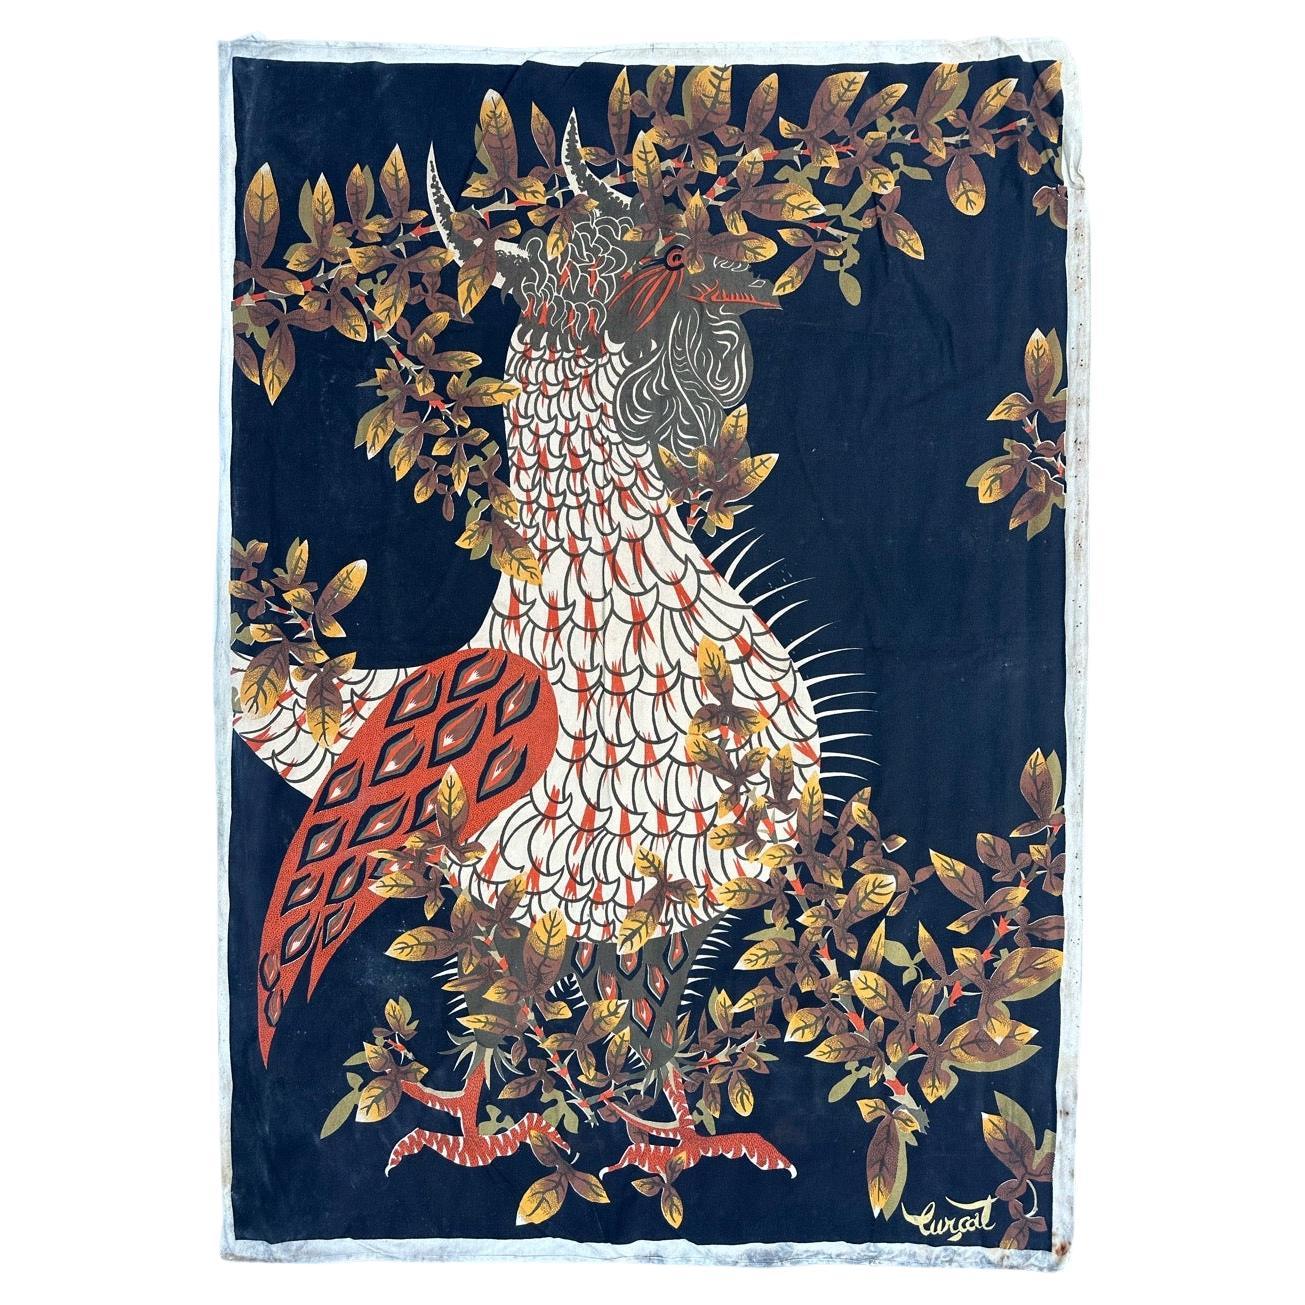 Nice Antique French Hand Printed Lurçat Signed Tapestry « Rooster » For Sale